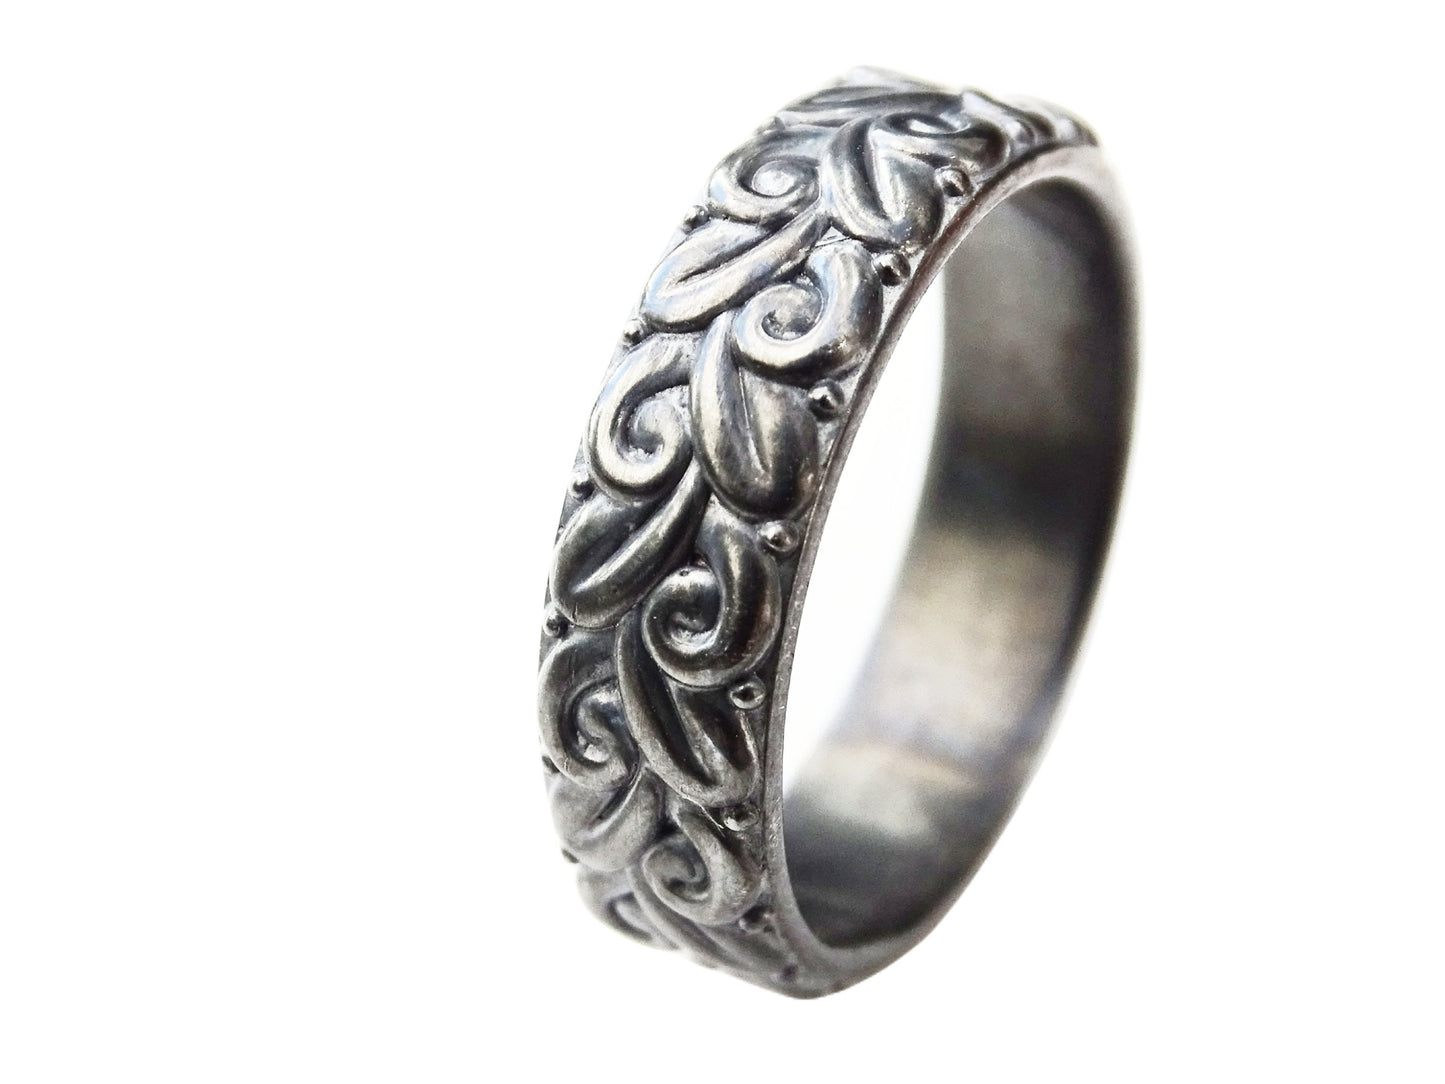 floral ring black silver, nature engagement ring silver, viking wedding ring men, sculped silver band, silver eternity ring, unique gift - CrazyAss Jewelry Designs